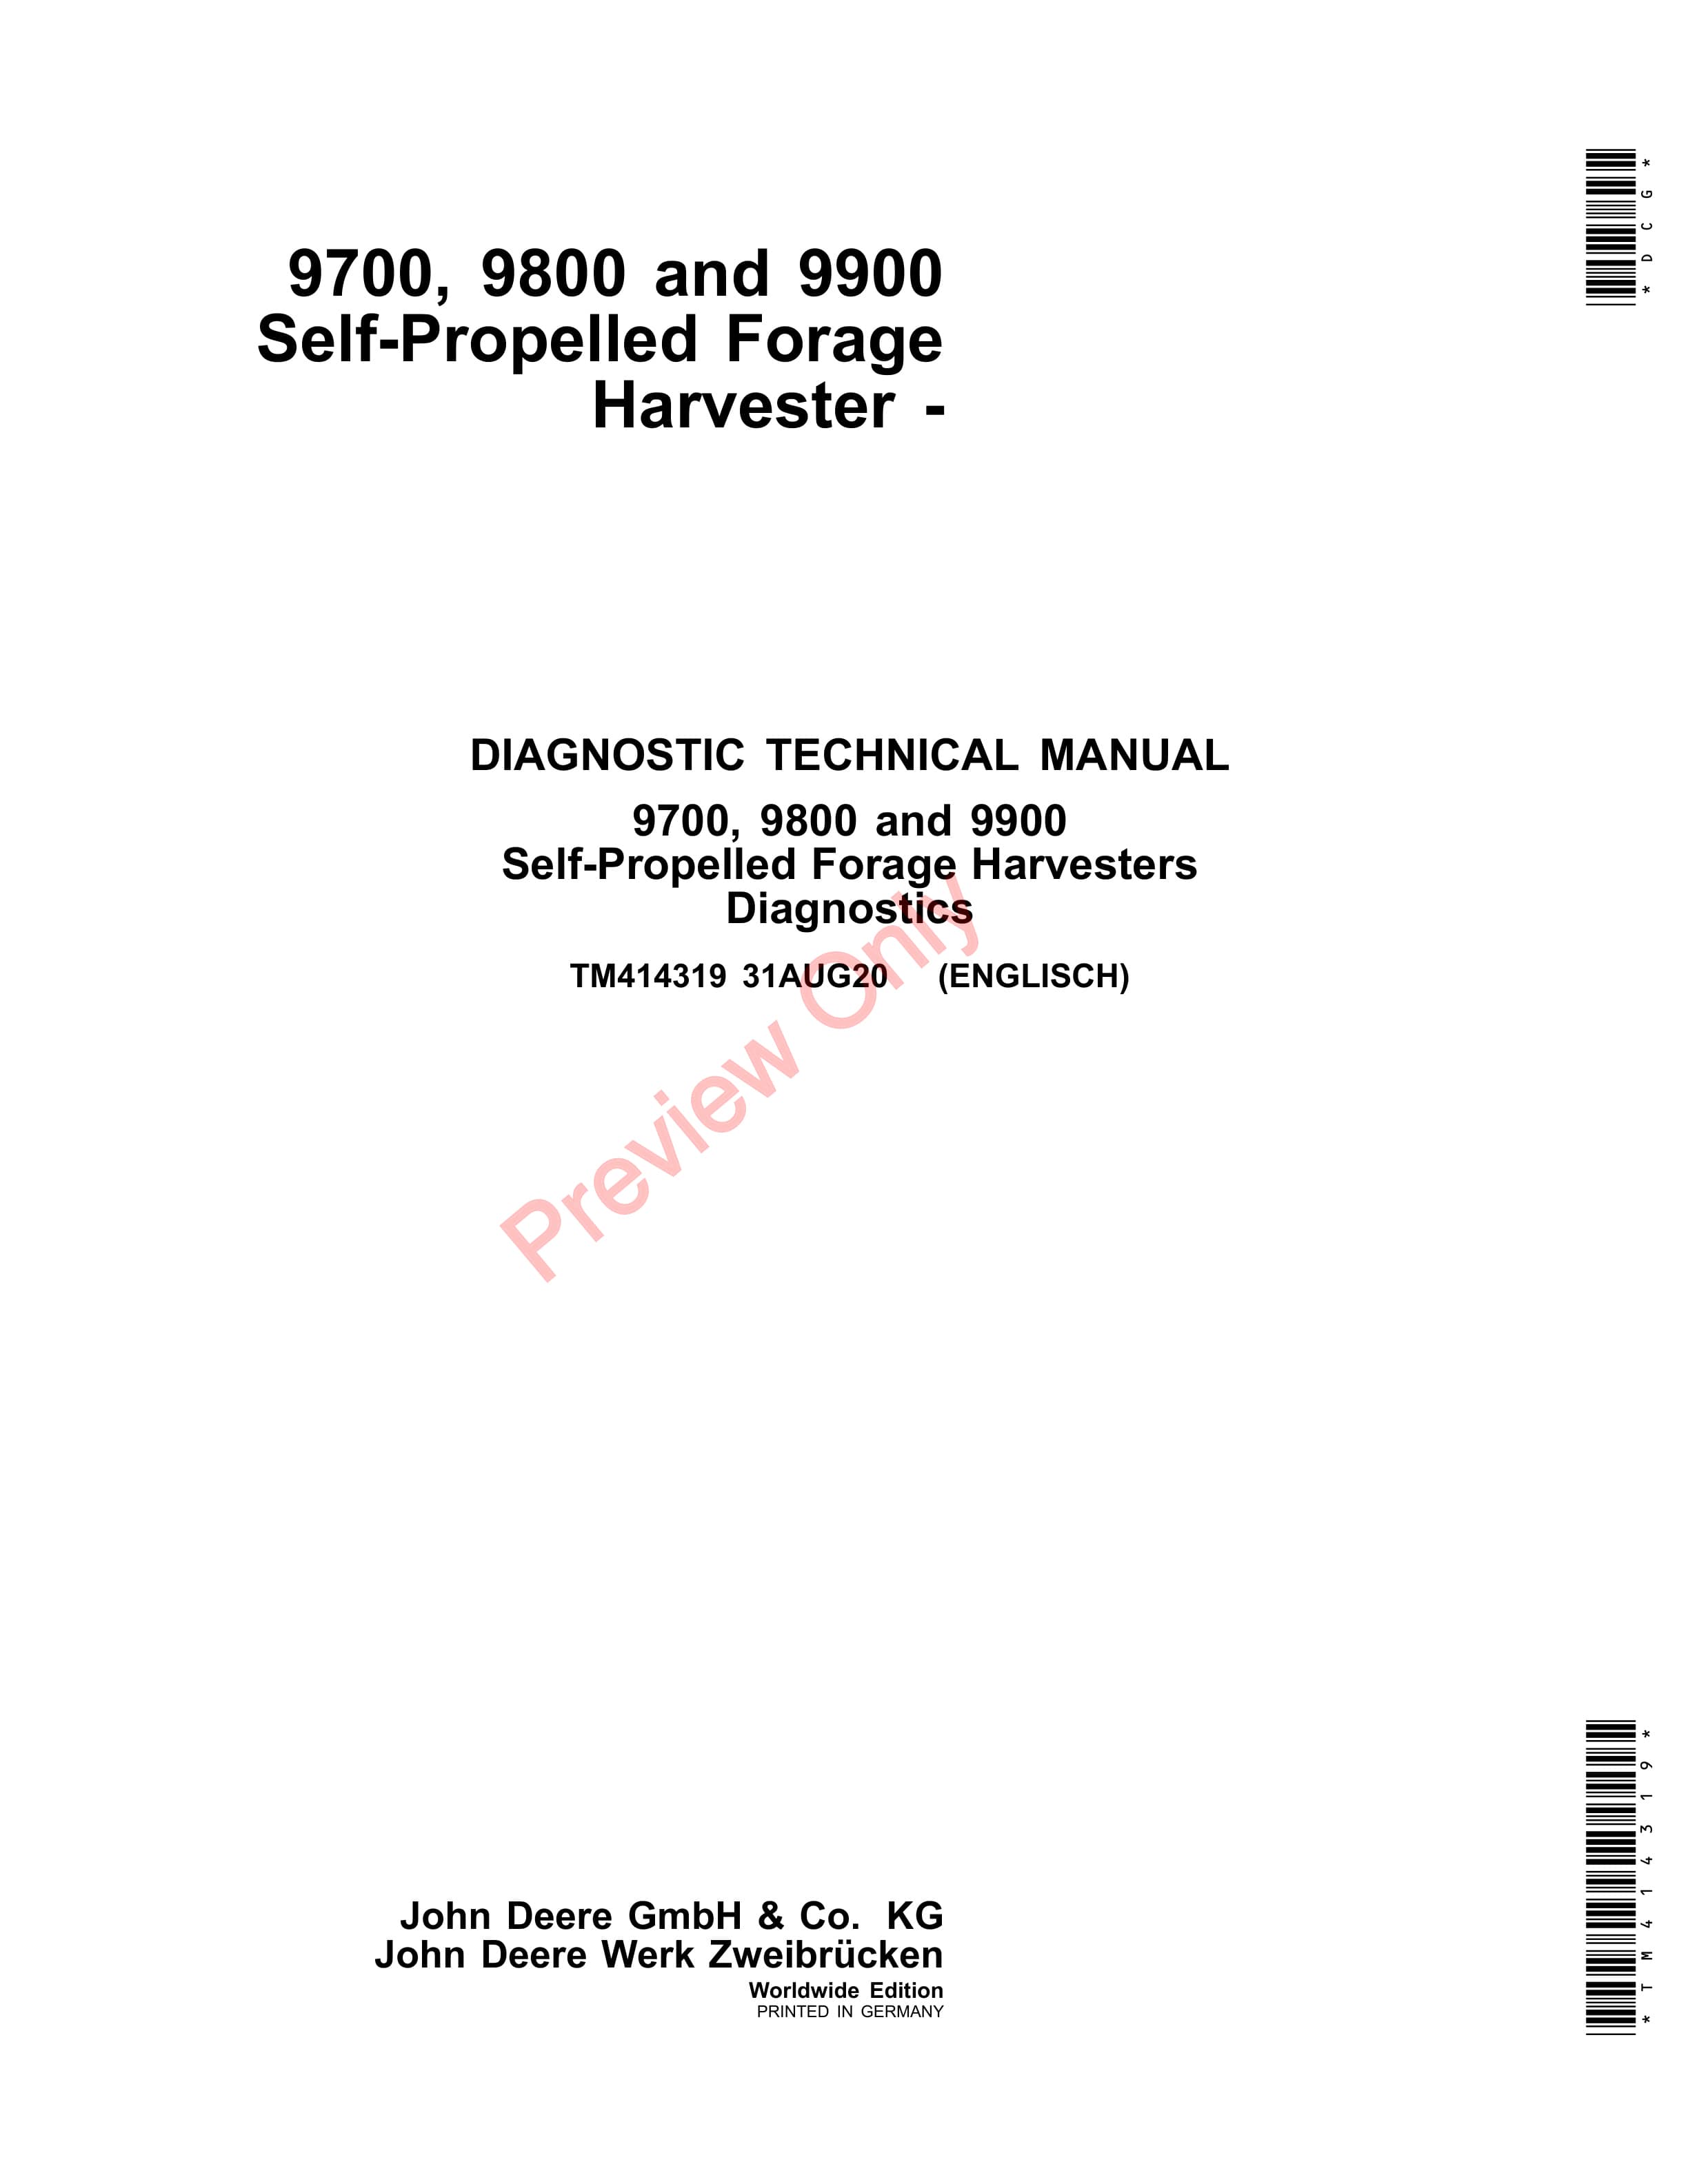 John Deere 9700 9800 and 9900 Self Propelled Forage Harvester Diagnostic Technical Manual TM414319 31AUG20 1